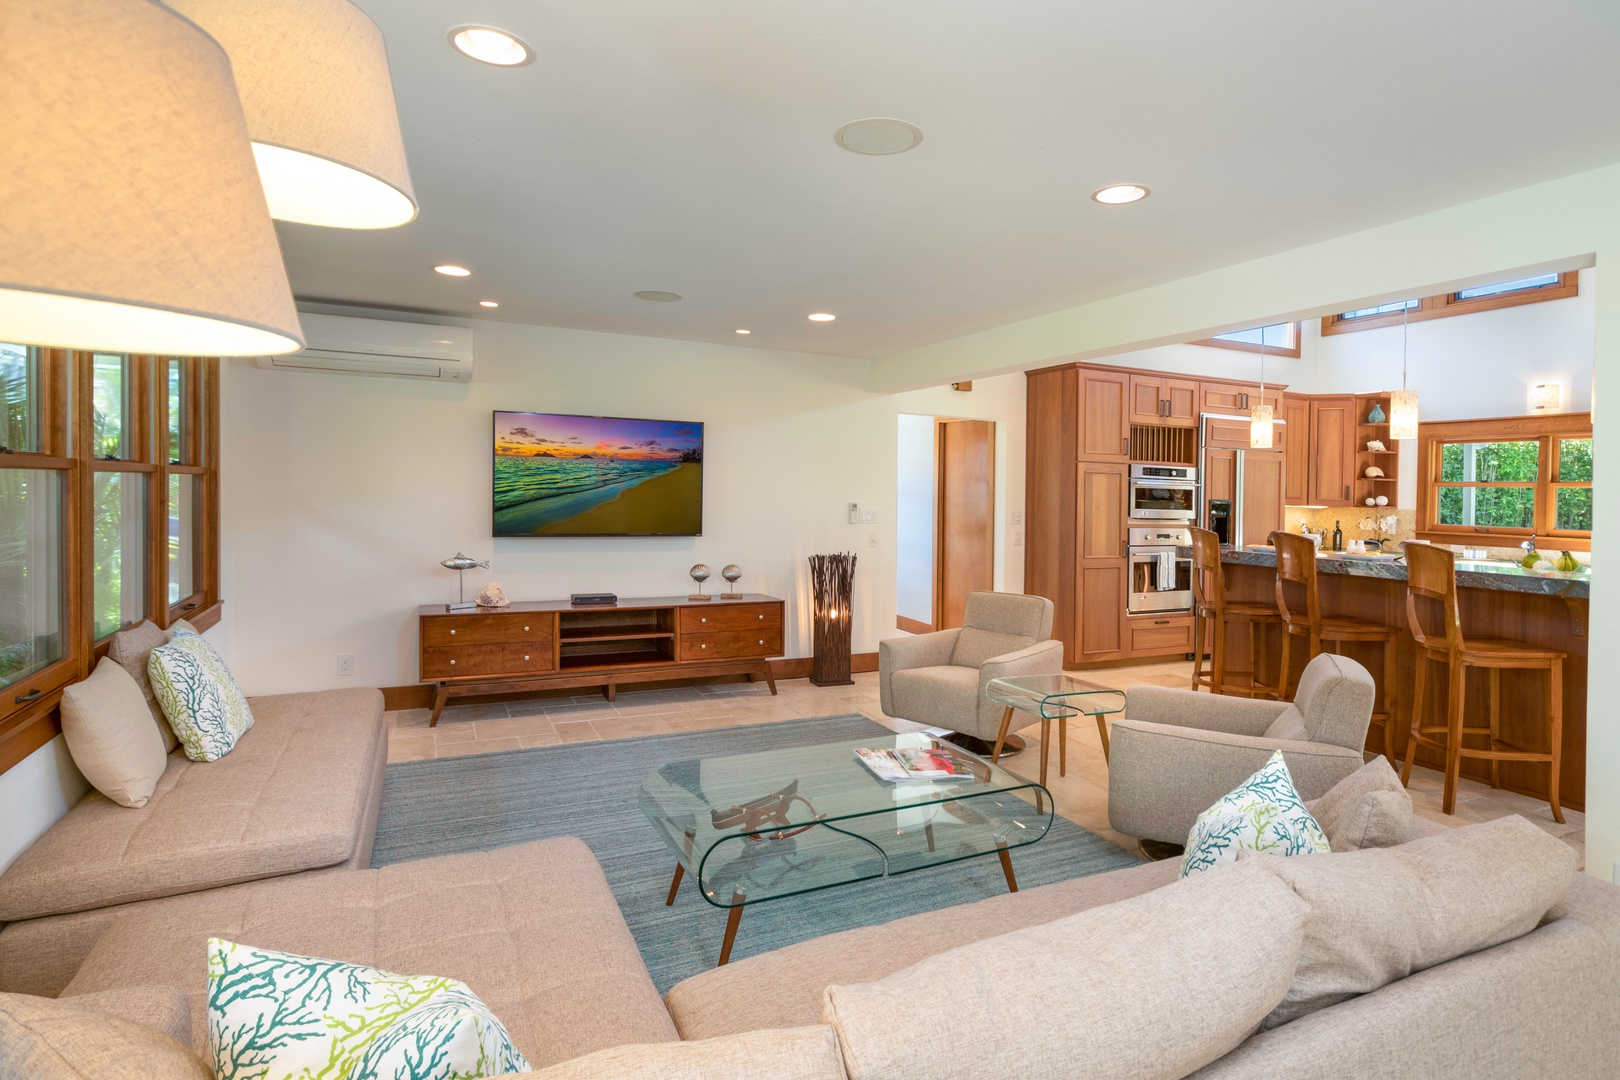 Honolulu Vacation Rentals, Hale Niuiki - The living room is attached to the kitchen and dining room. With an L-shape couch, there is enough space for everyone to watch a movie or TV.